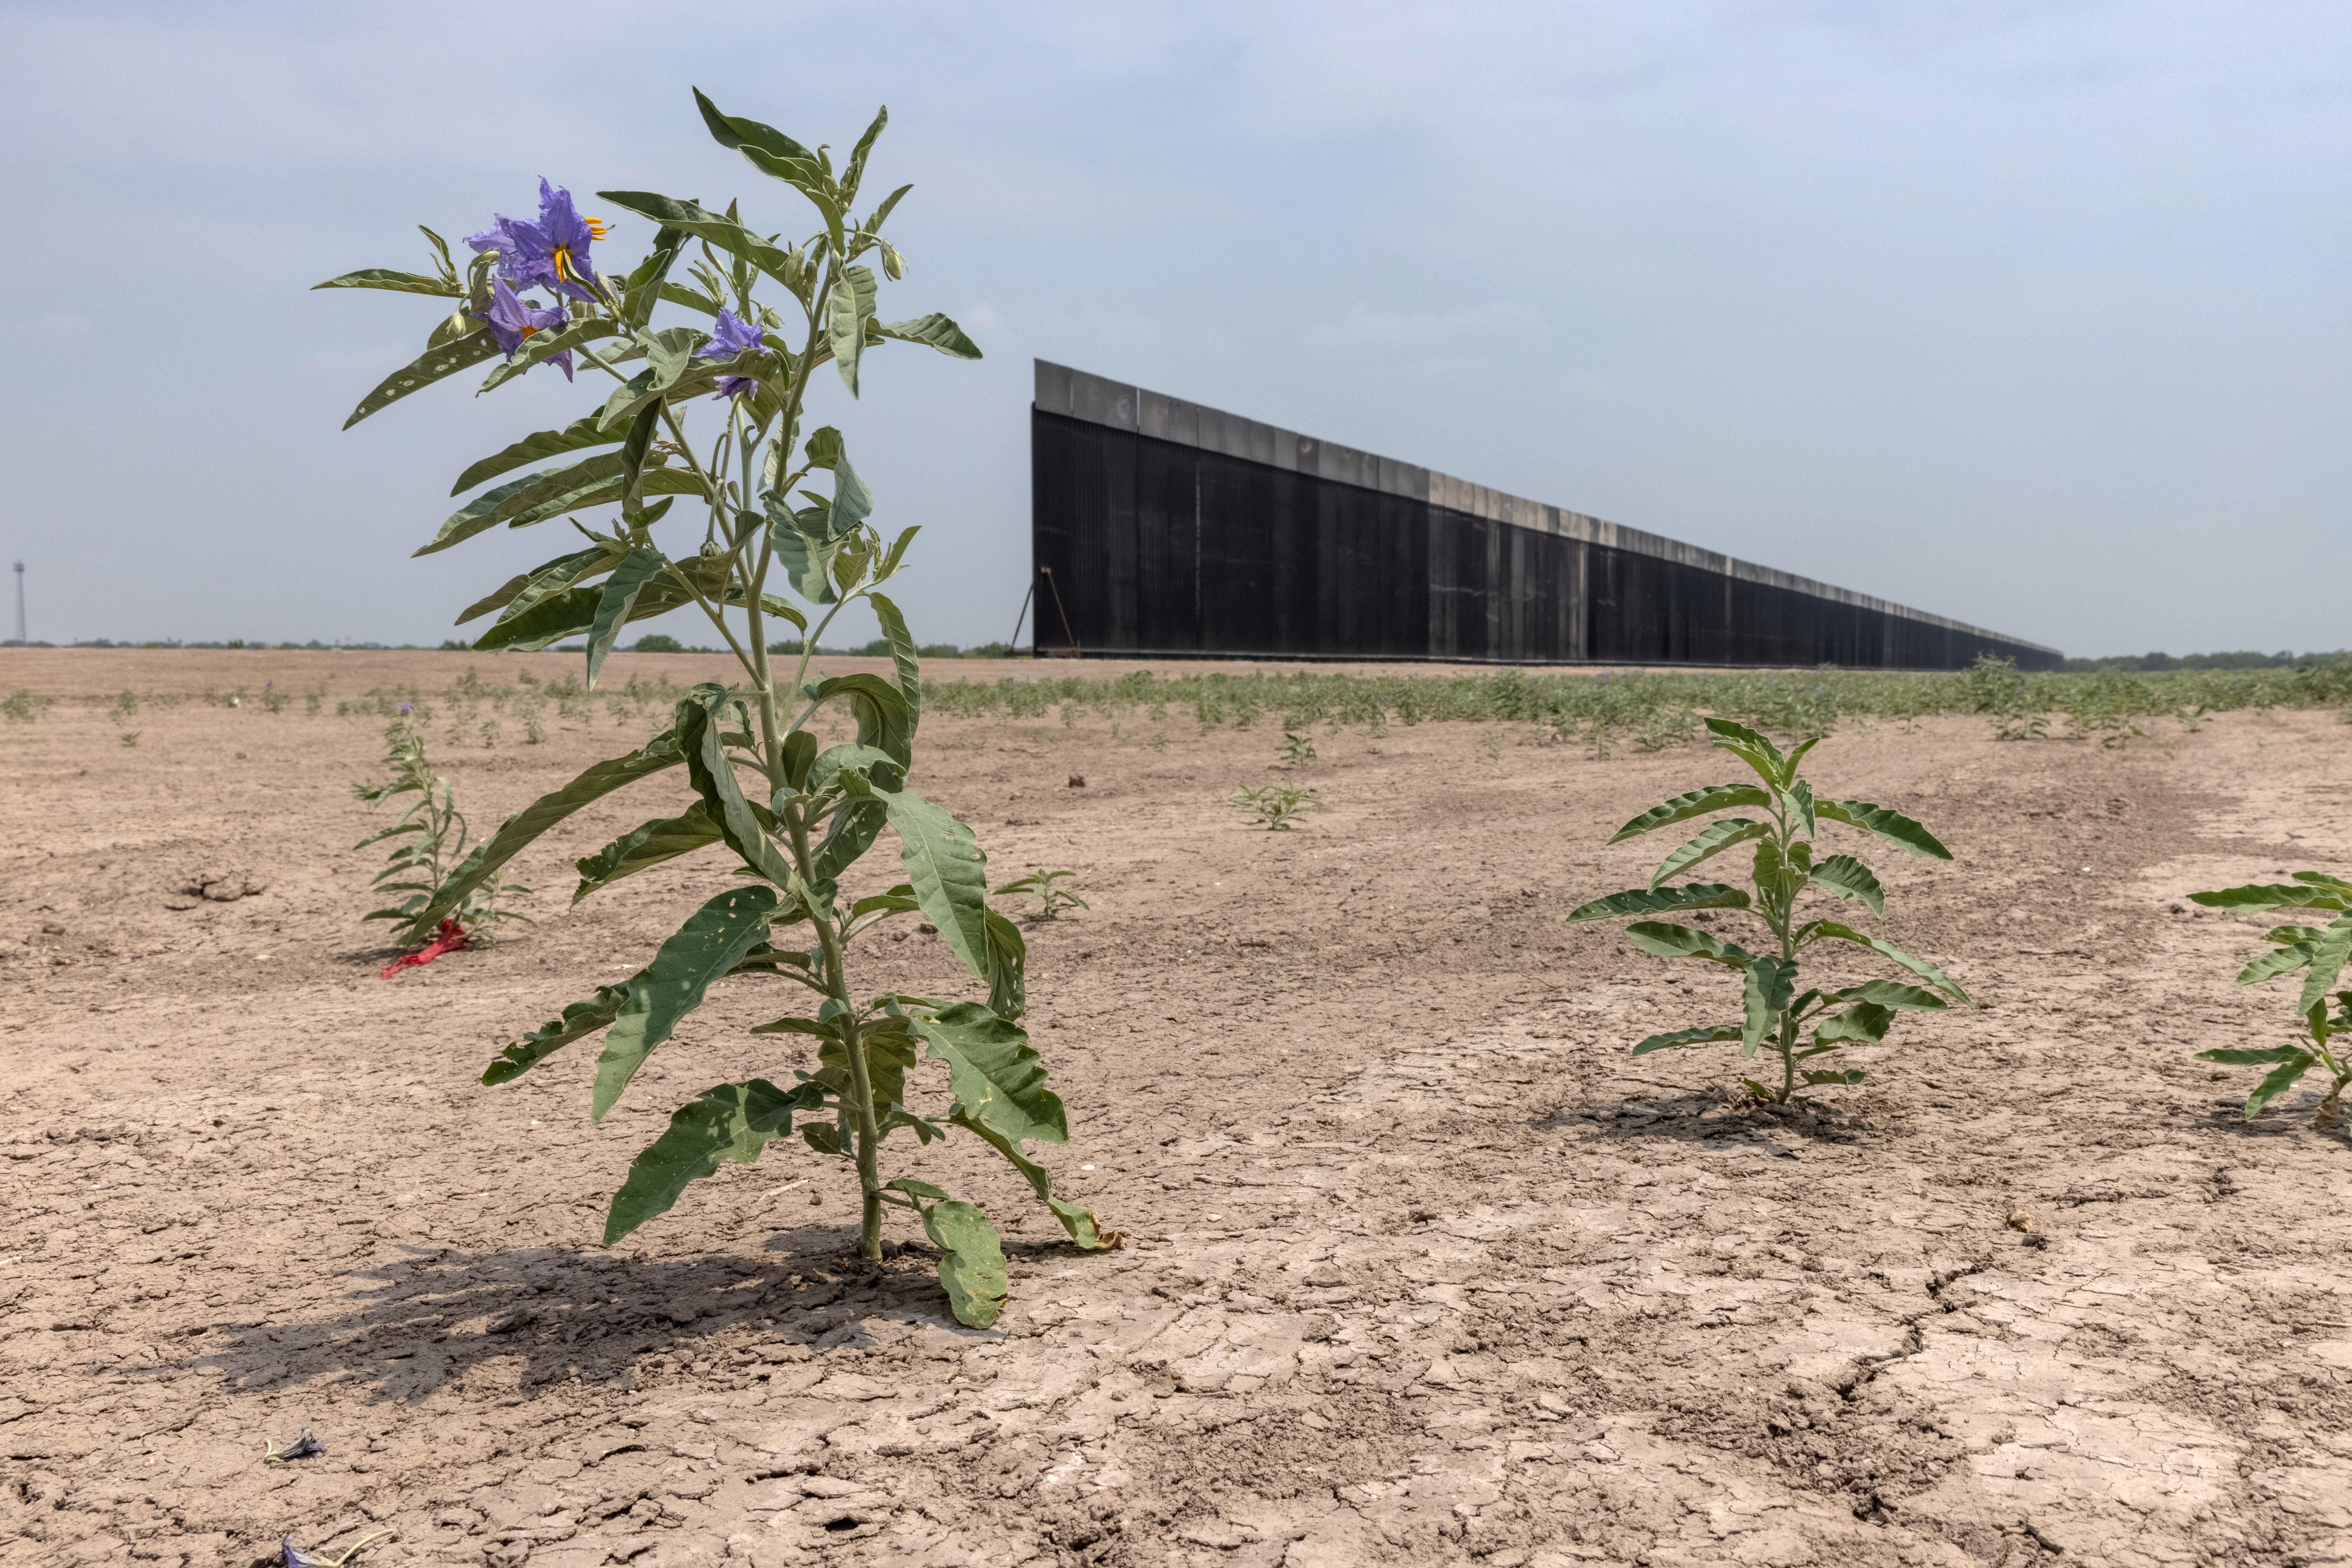 A section of the border wall stops halted in the desert with a flower in the foreground.